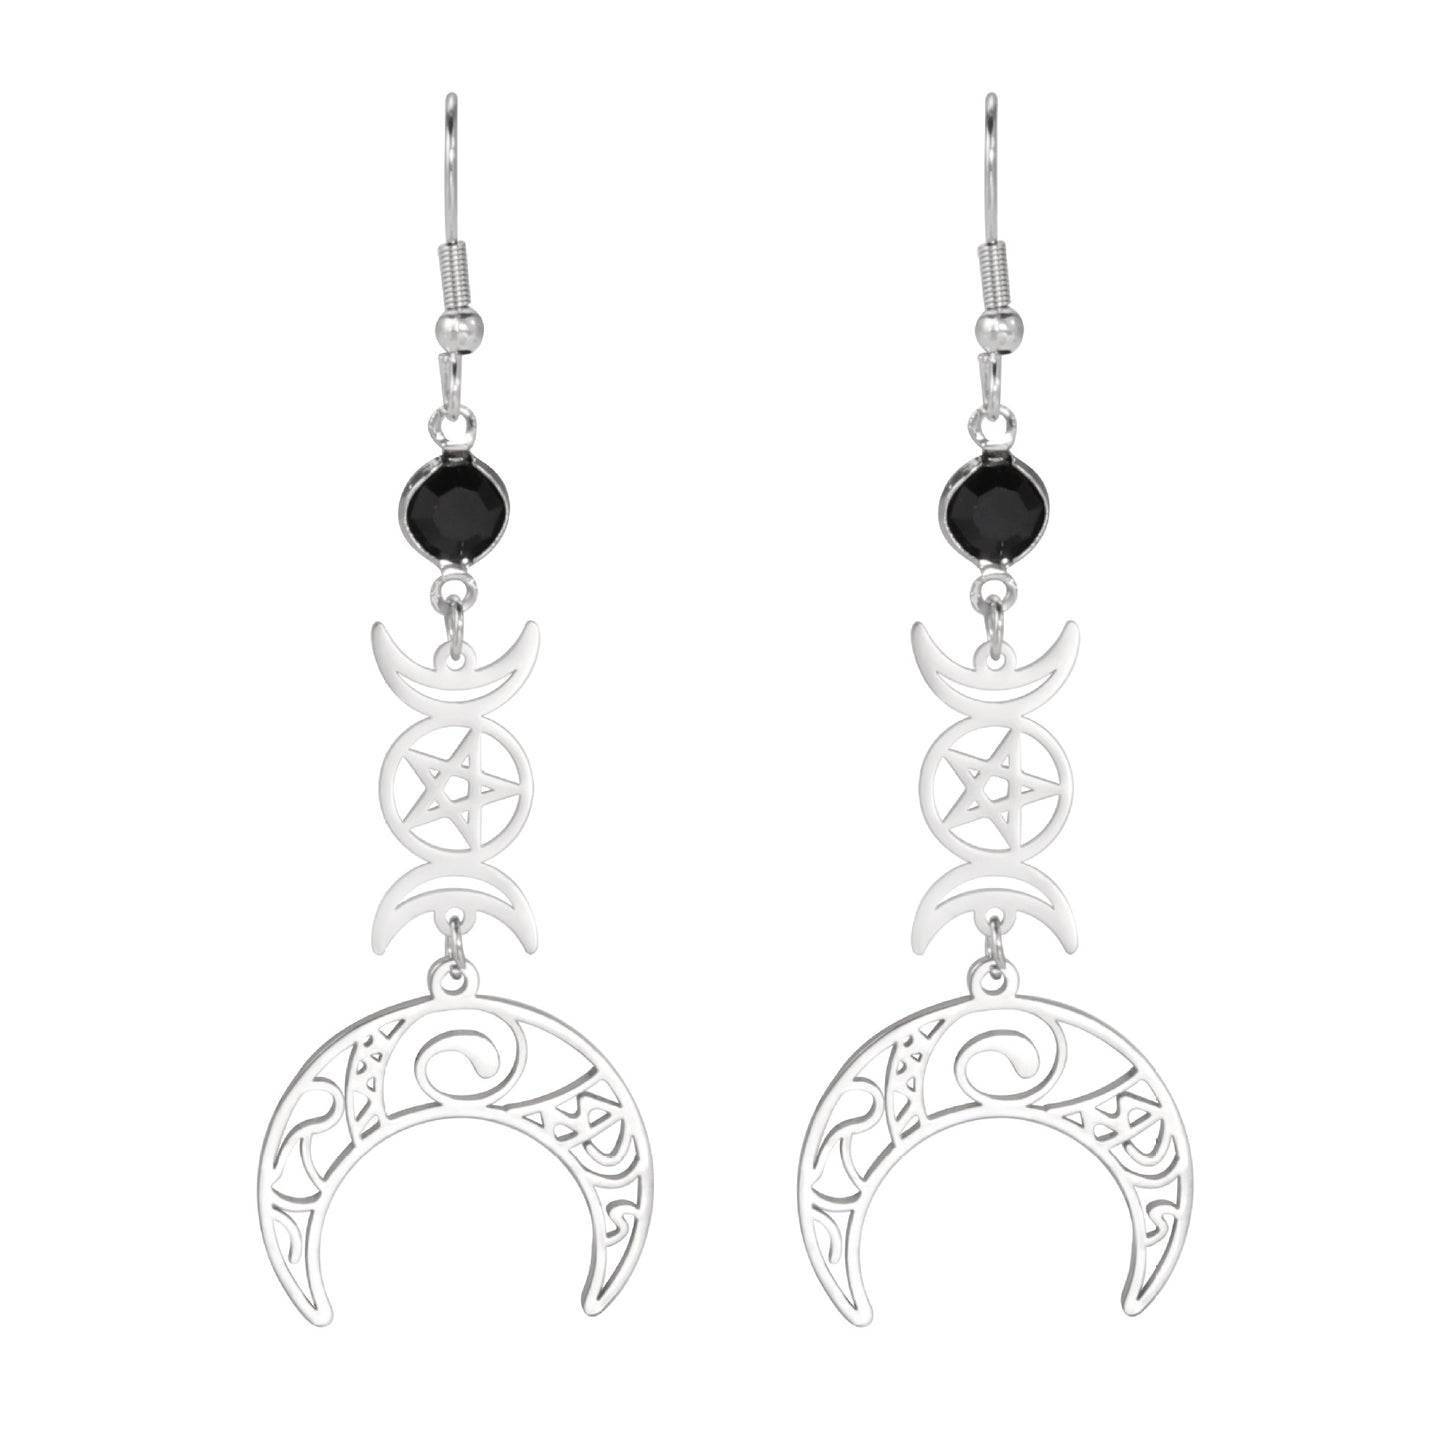 Wiccan Strength Protection Earrings